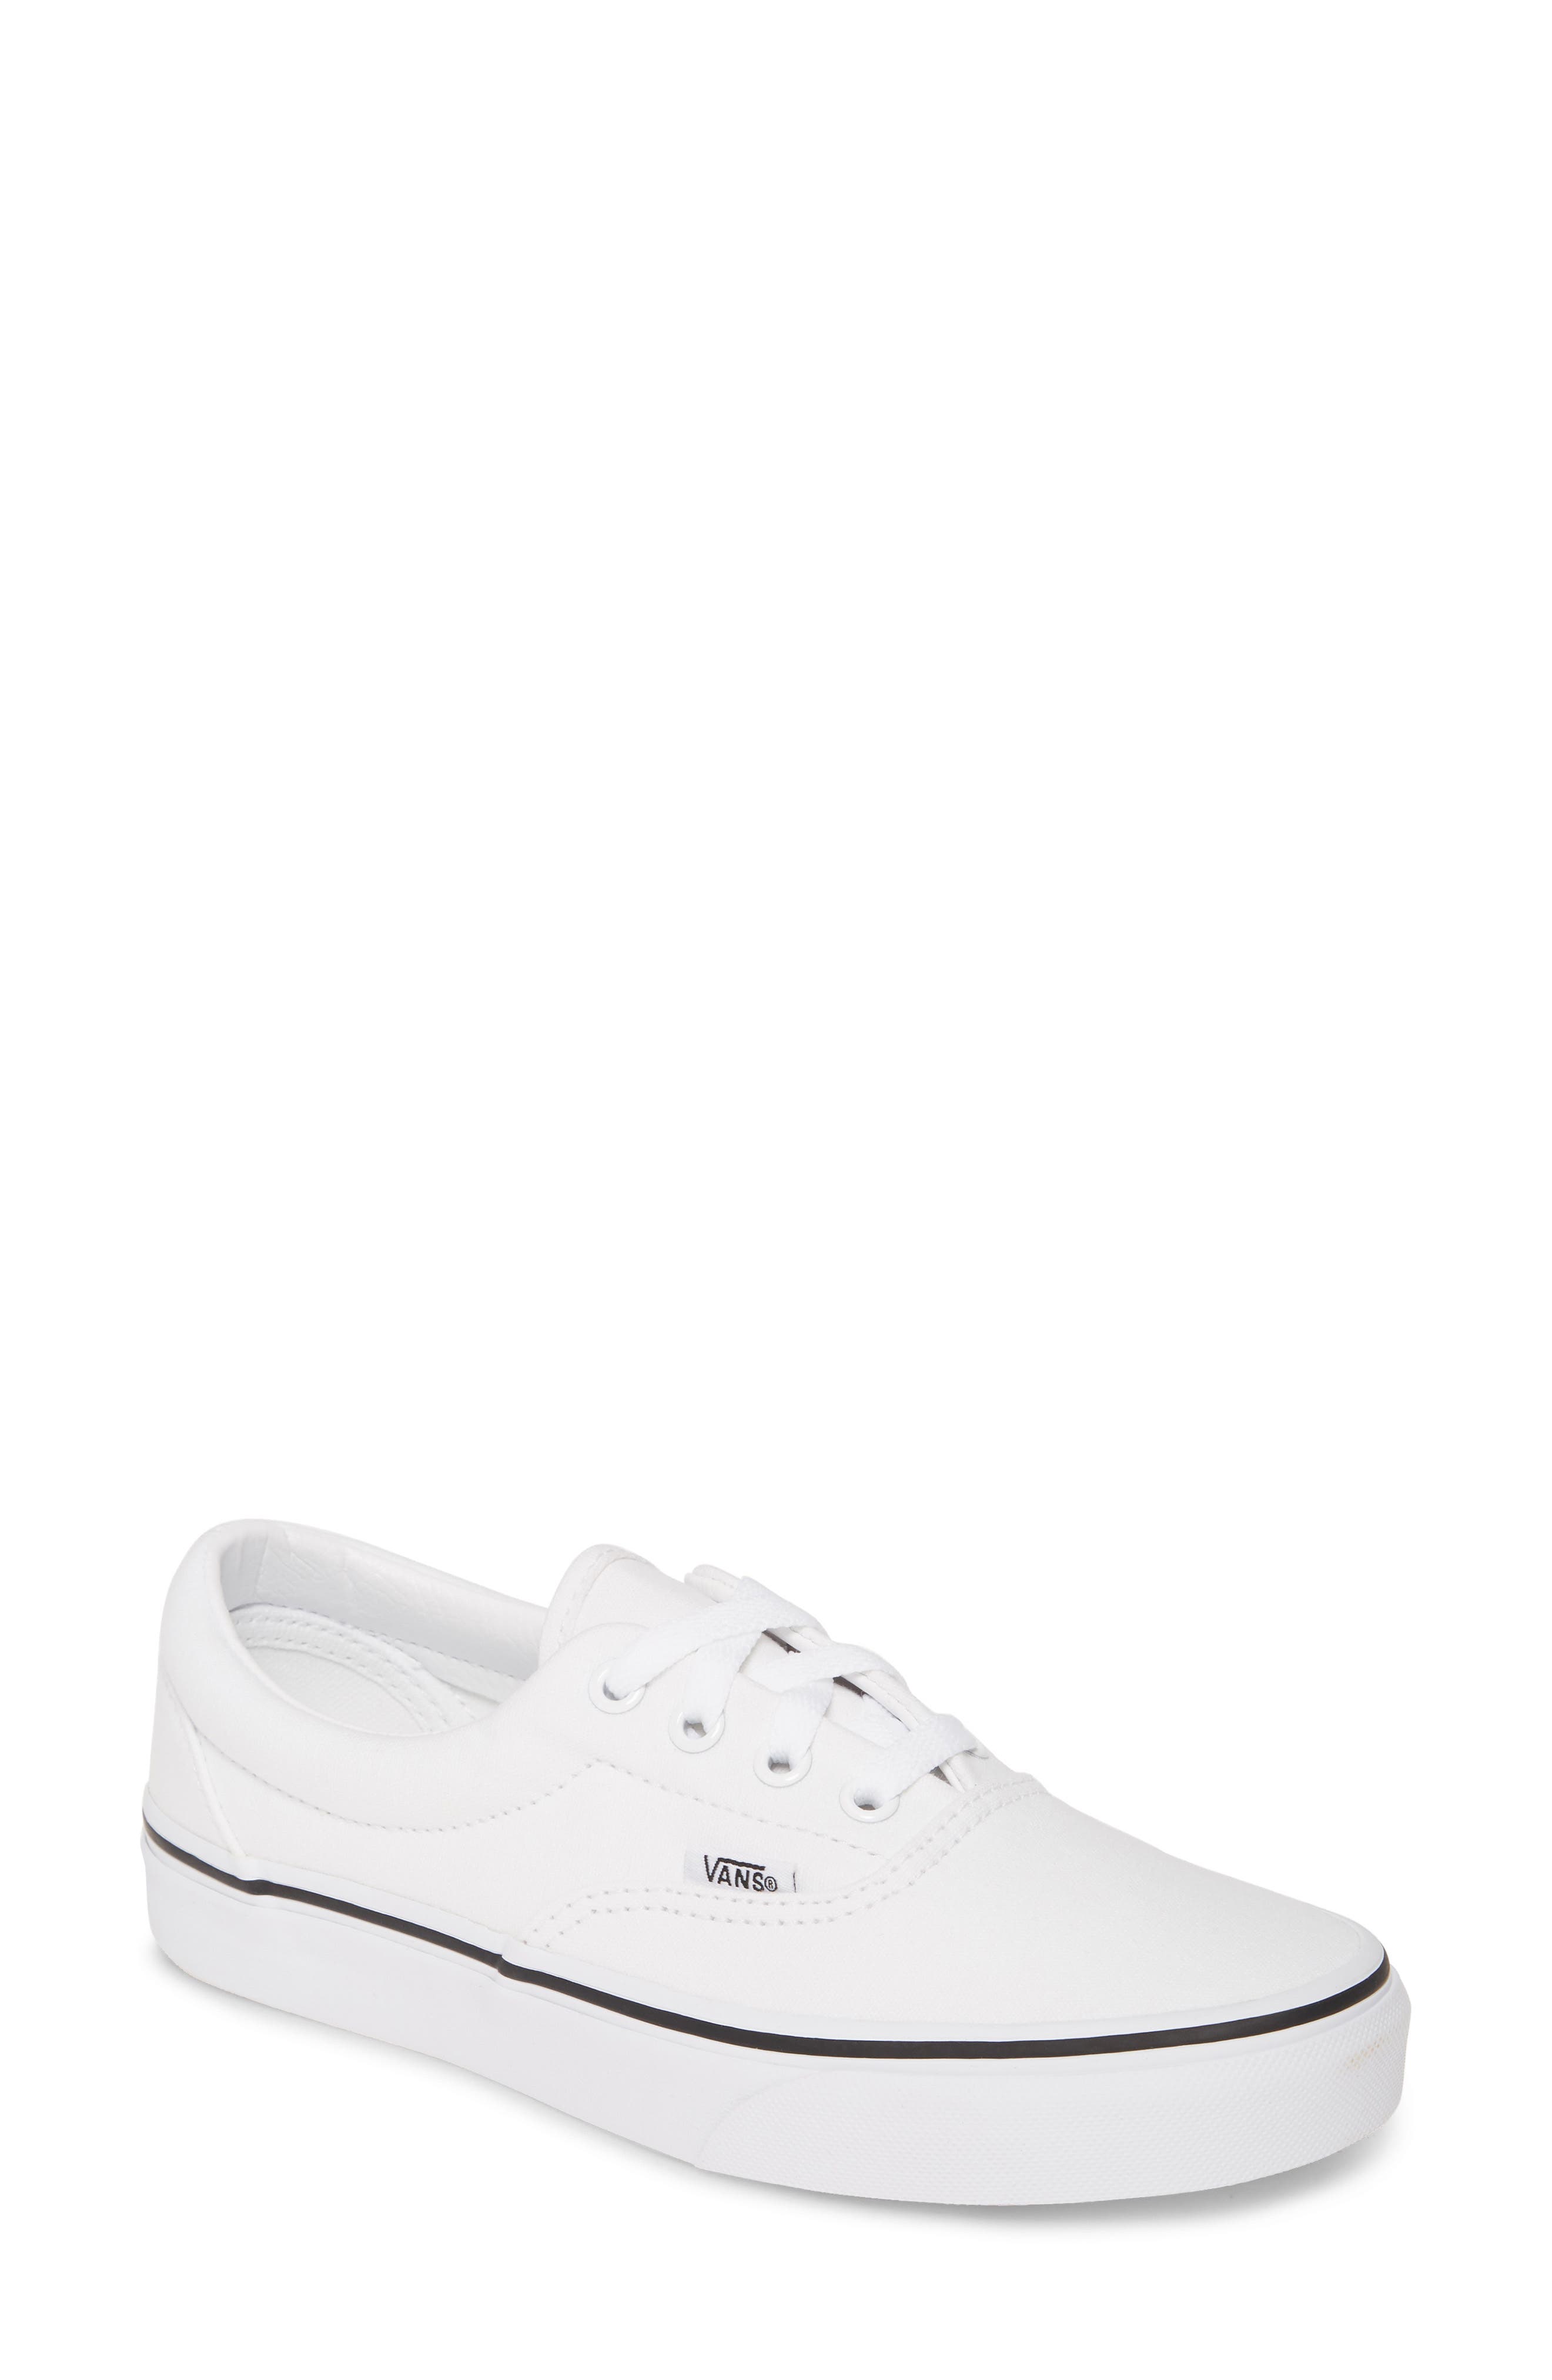 white vans with laces womens